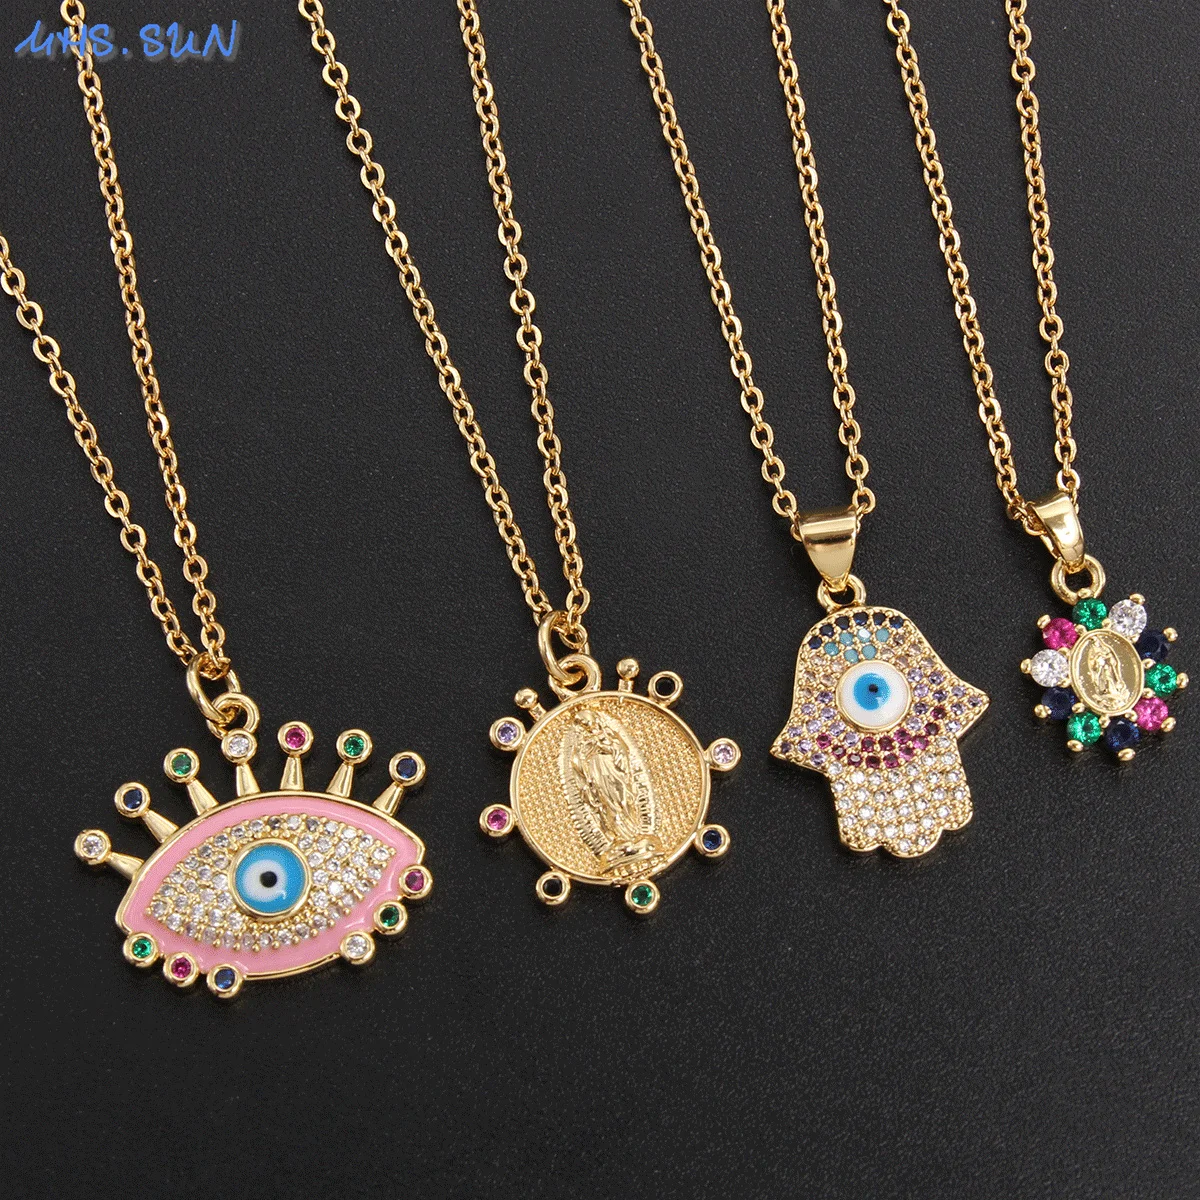 

MHS.SUN Newest Gold Plated Turkish Evil Eye Necklace Zircon Religious Virgin Pendant Necklaces Woman Clavicel Chain Jewelry Gift